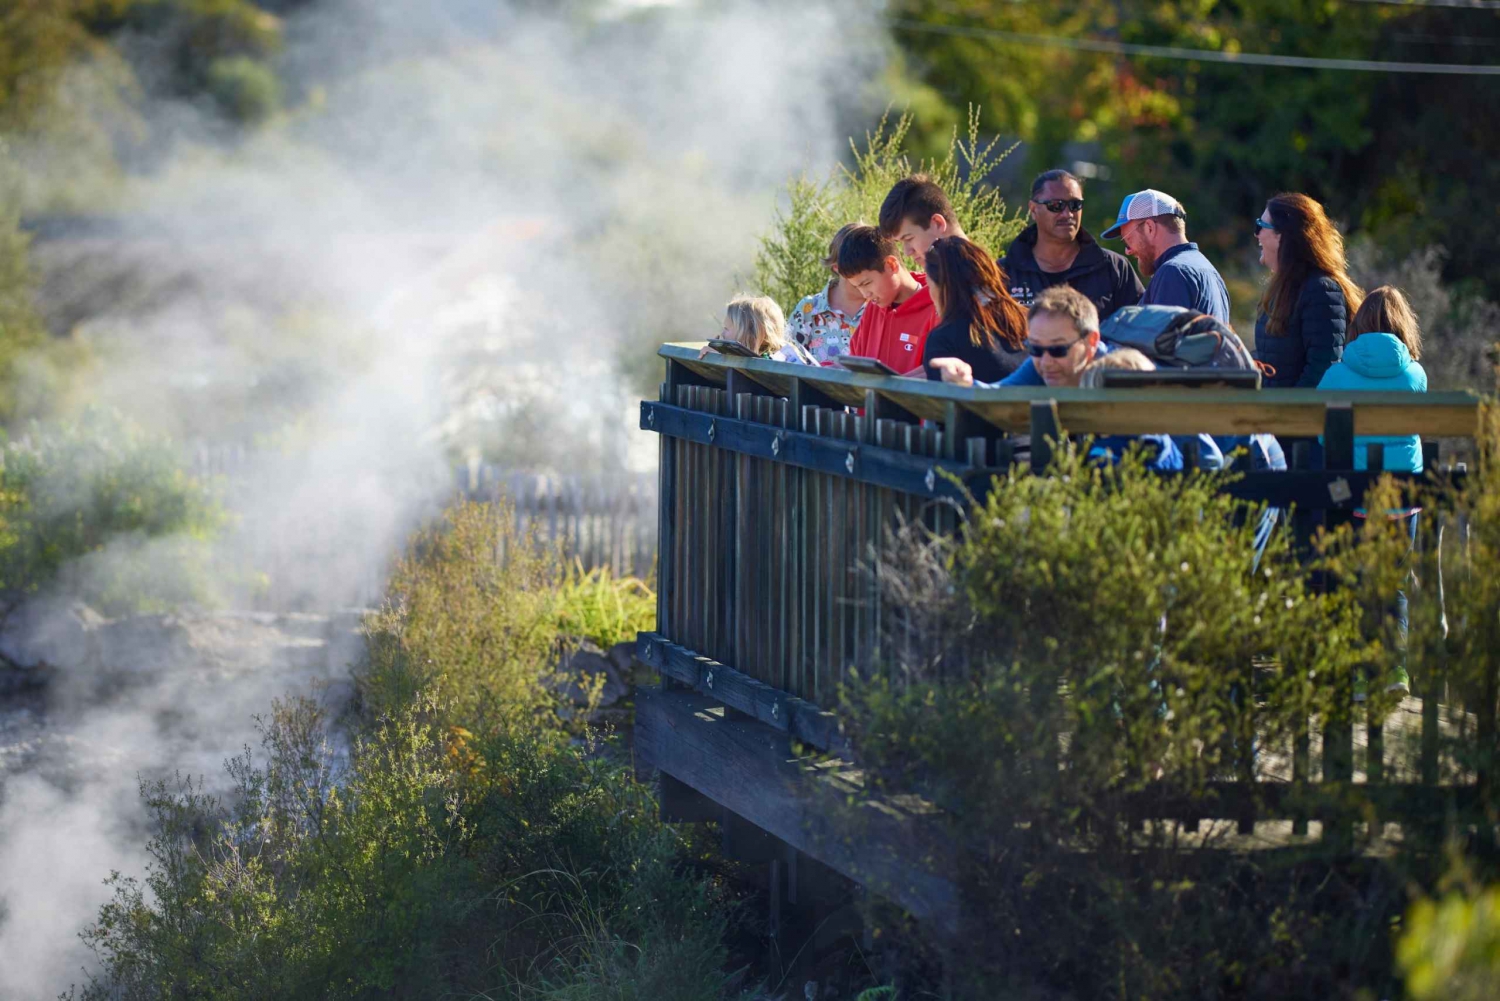 Whaka Village Guided Tour & Self-Guided Geothermal Trails